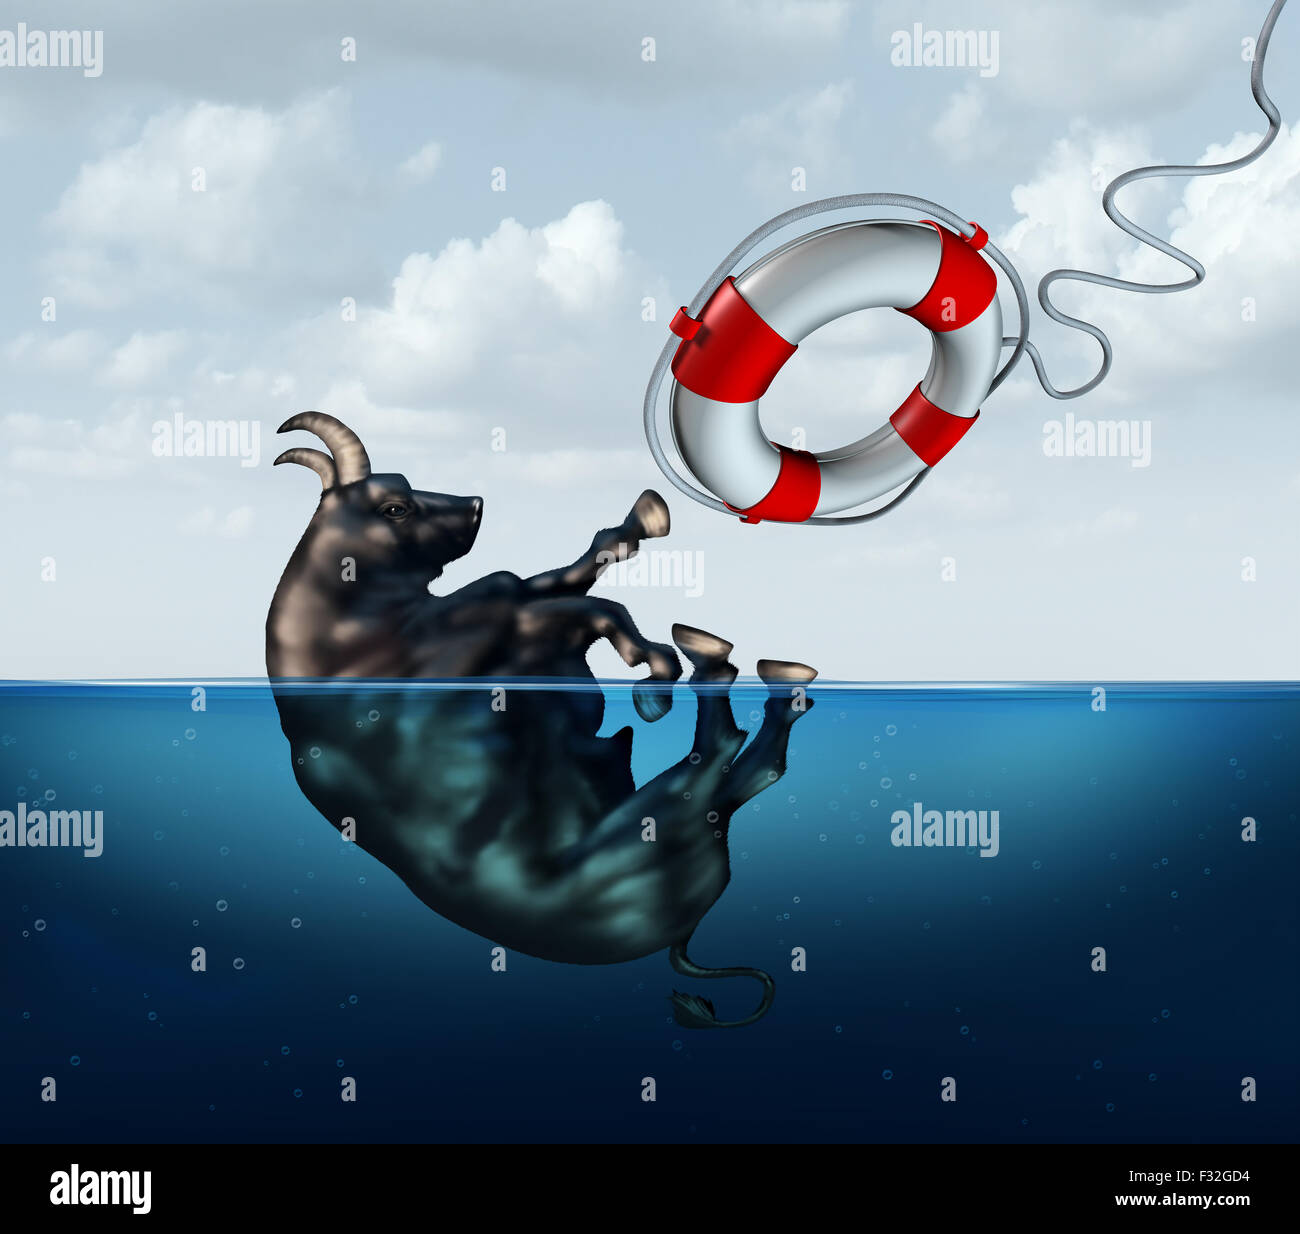 Saving the bull market business concept or financial investment safety metaphor as a bull drowning in water with a lifesaver coming to the assistance of the stressed financial icon as a stock market crisis icon. Stock Photo